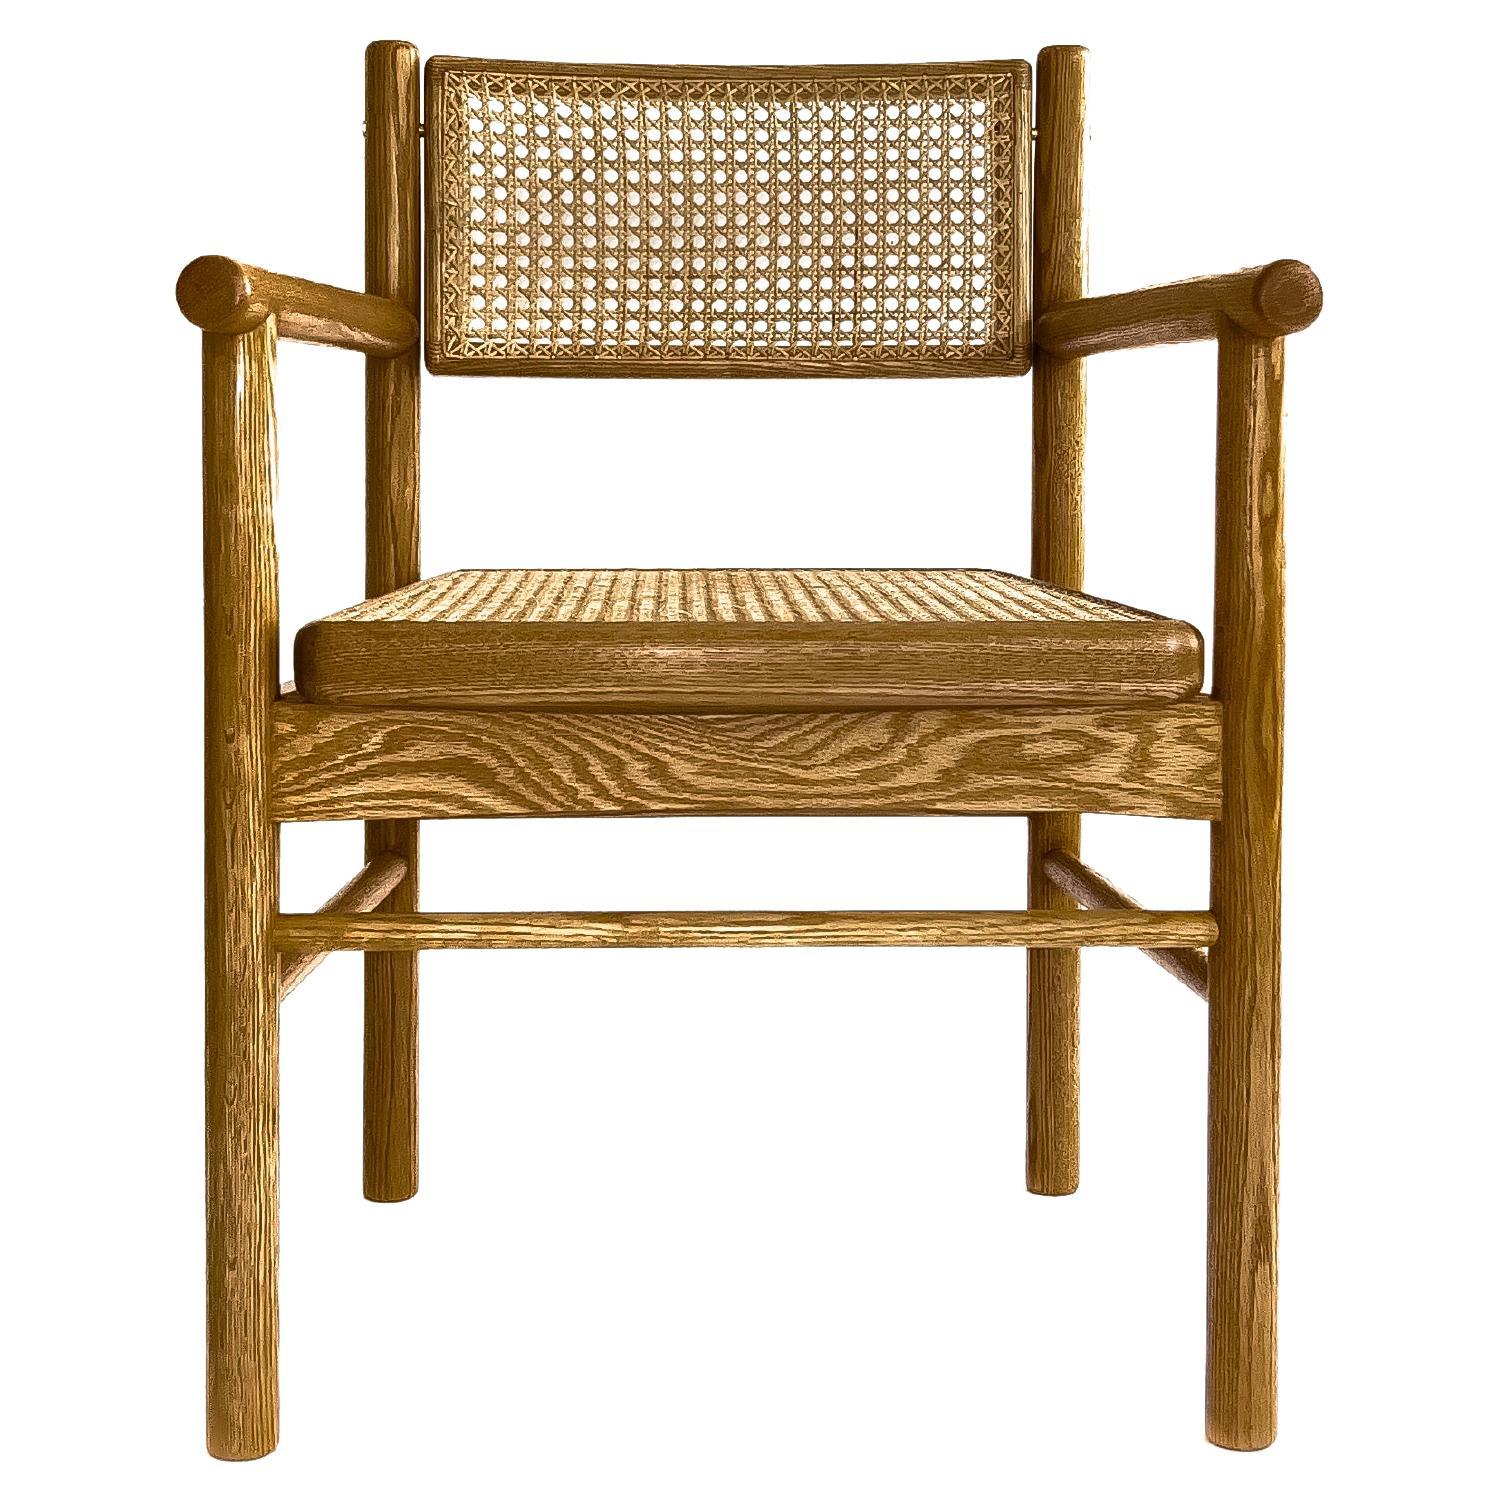 Mr. Cane,  hand canned wicker dining armchair with a self adjustable swivel back For Sale